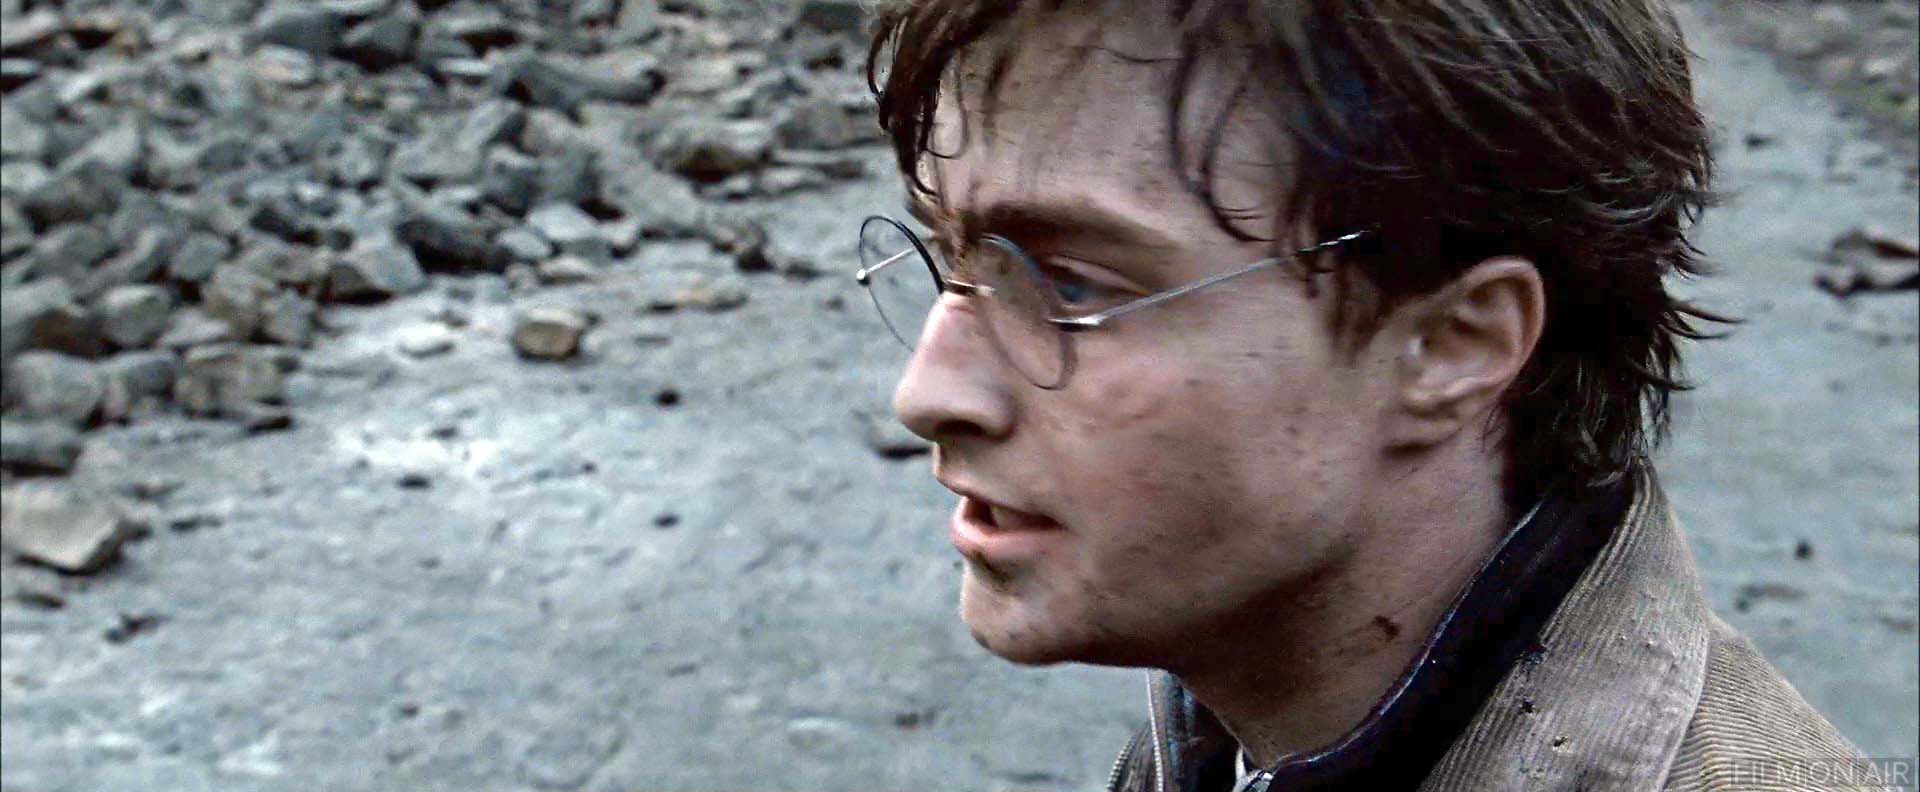 Harry Dirty Face
 in Harry Potter and the Deathly Hallows Part 2 in Harry Potter and the Deathly Hallows Part 2